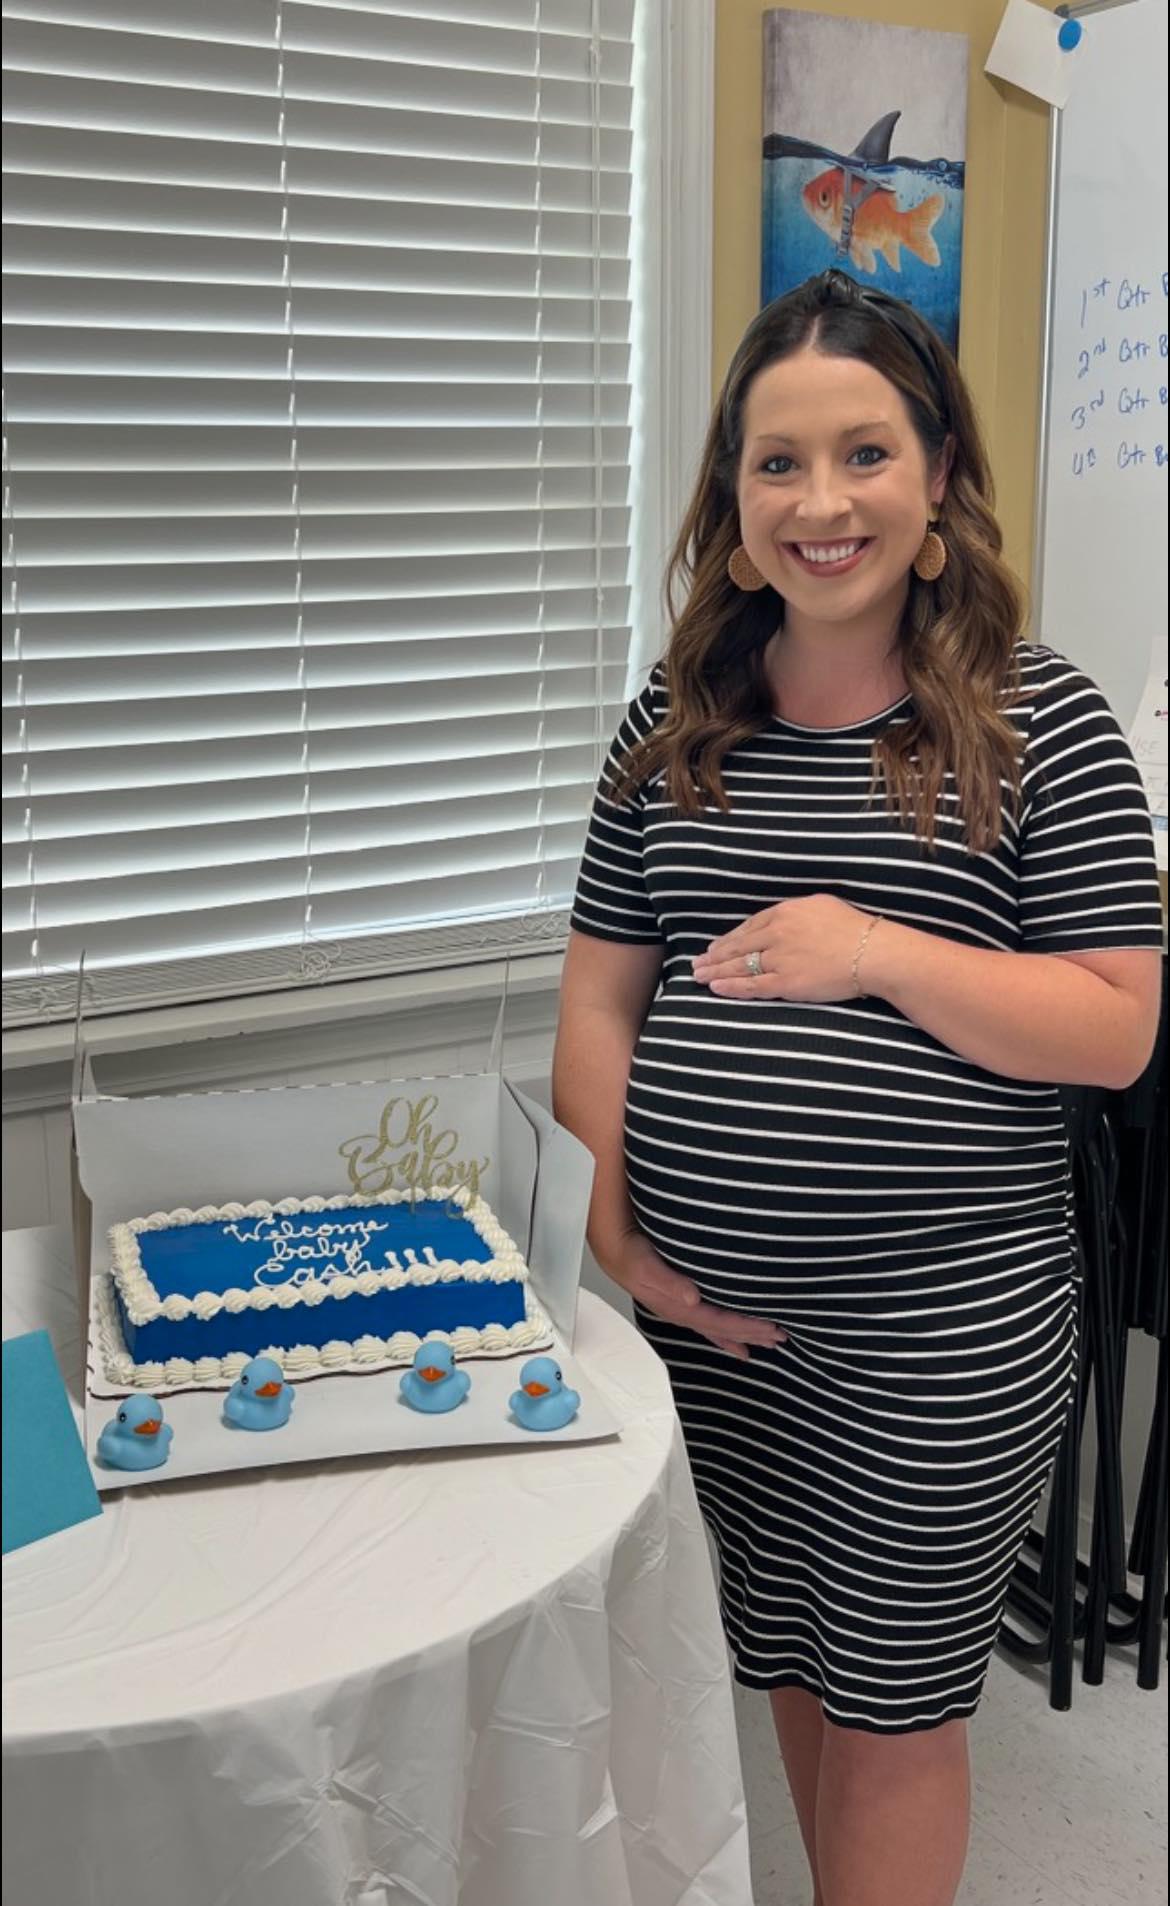 Devin’s last day before maternity leave! Next time she’s in the office she’ll be a mother of 2!